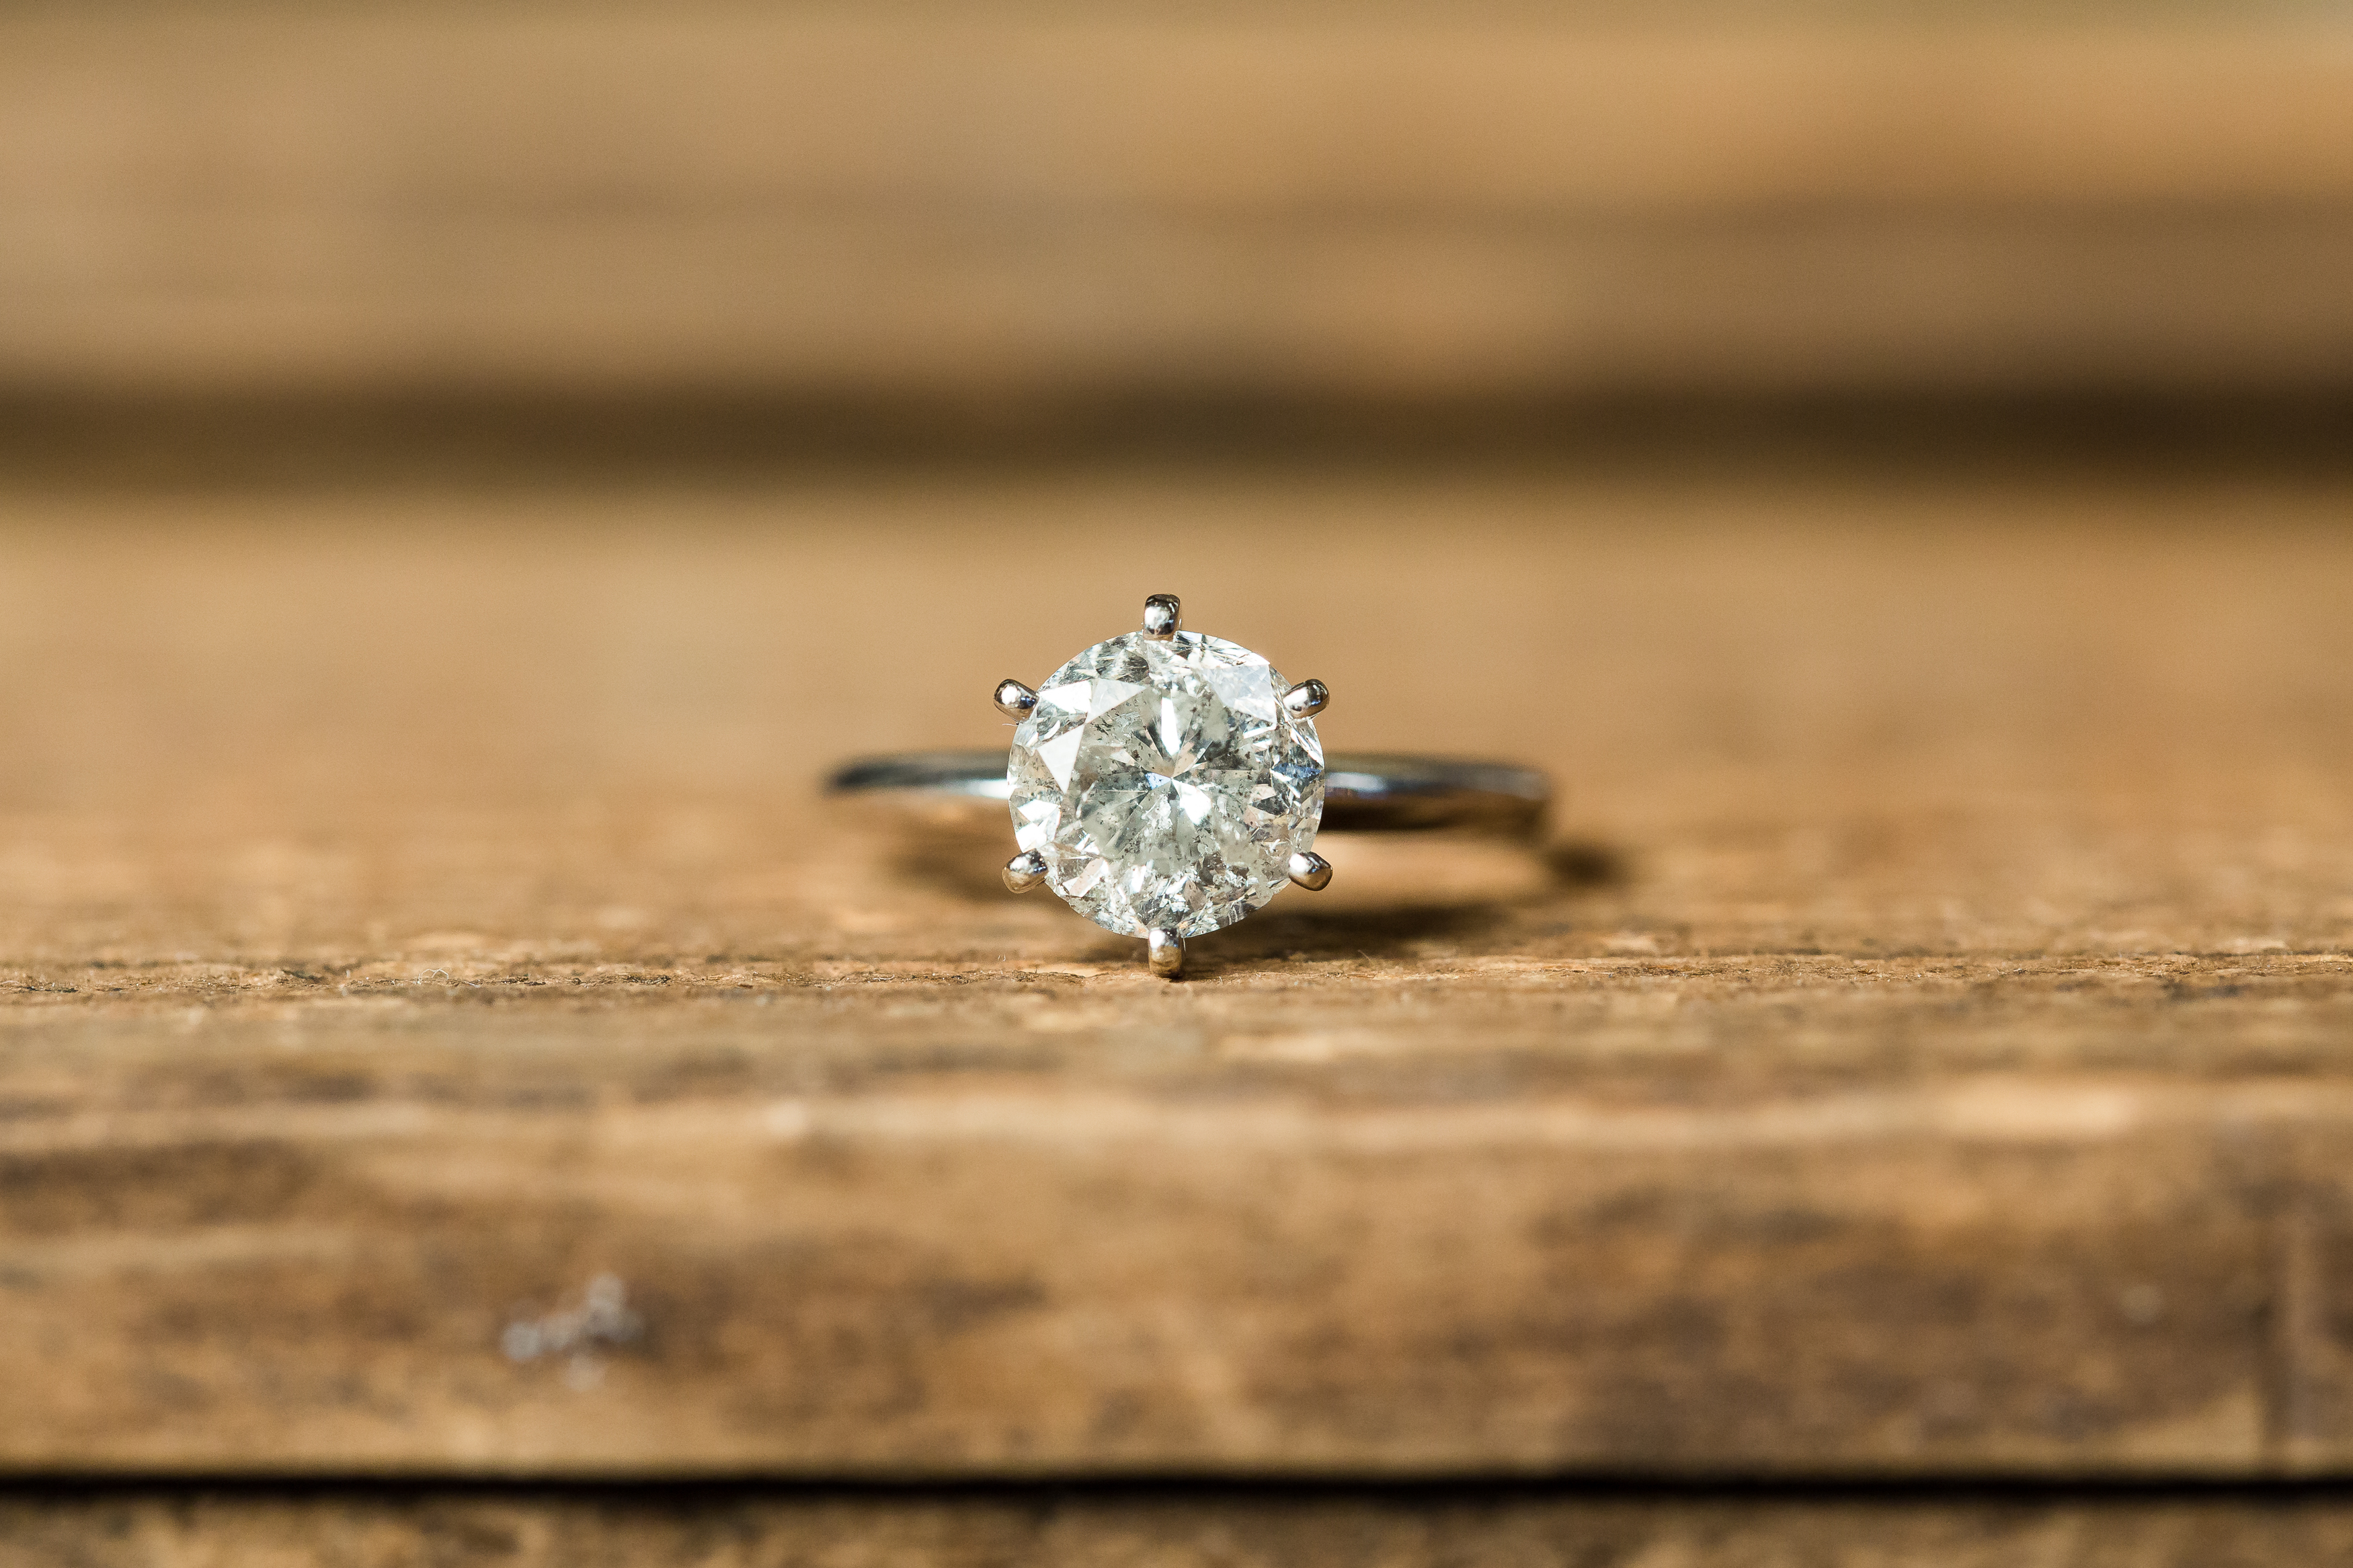 Engagement diamond ring on wooden table